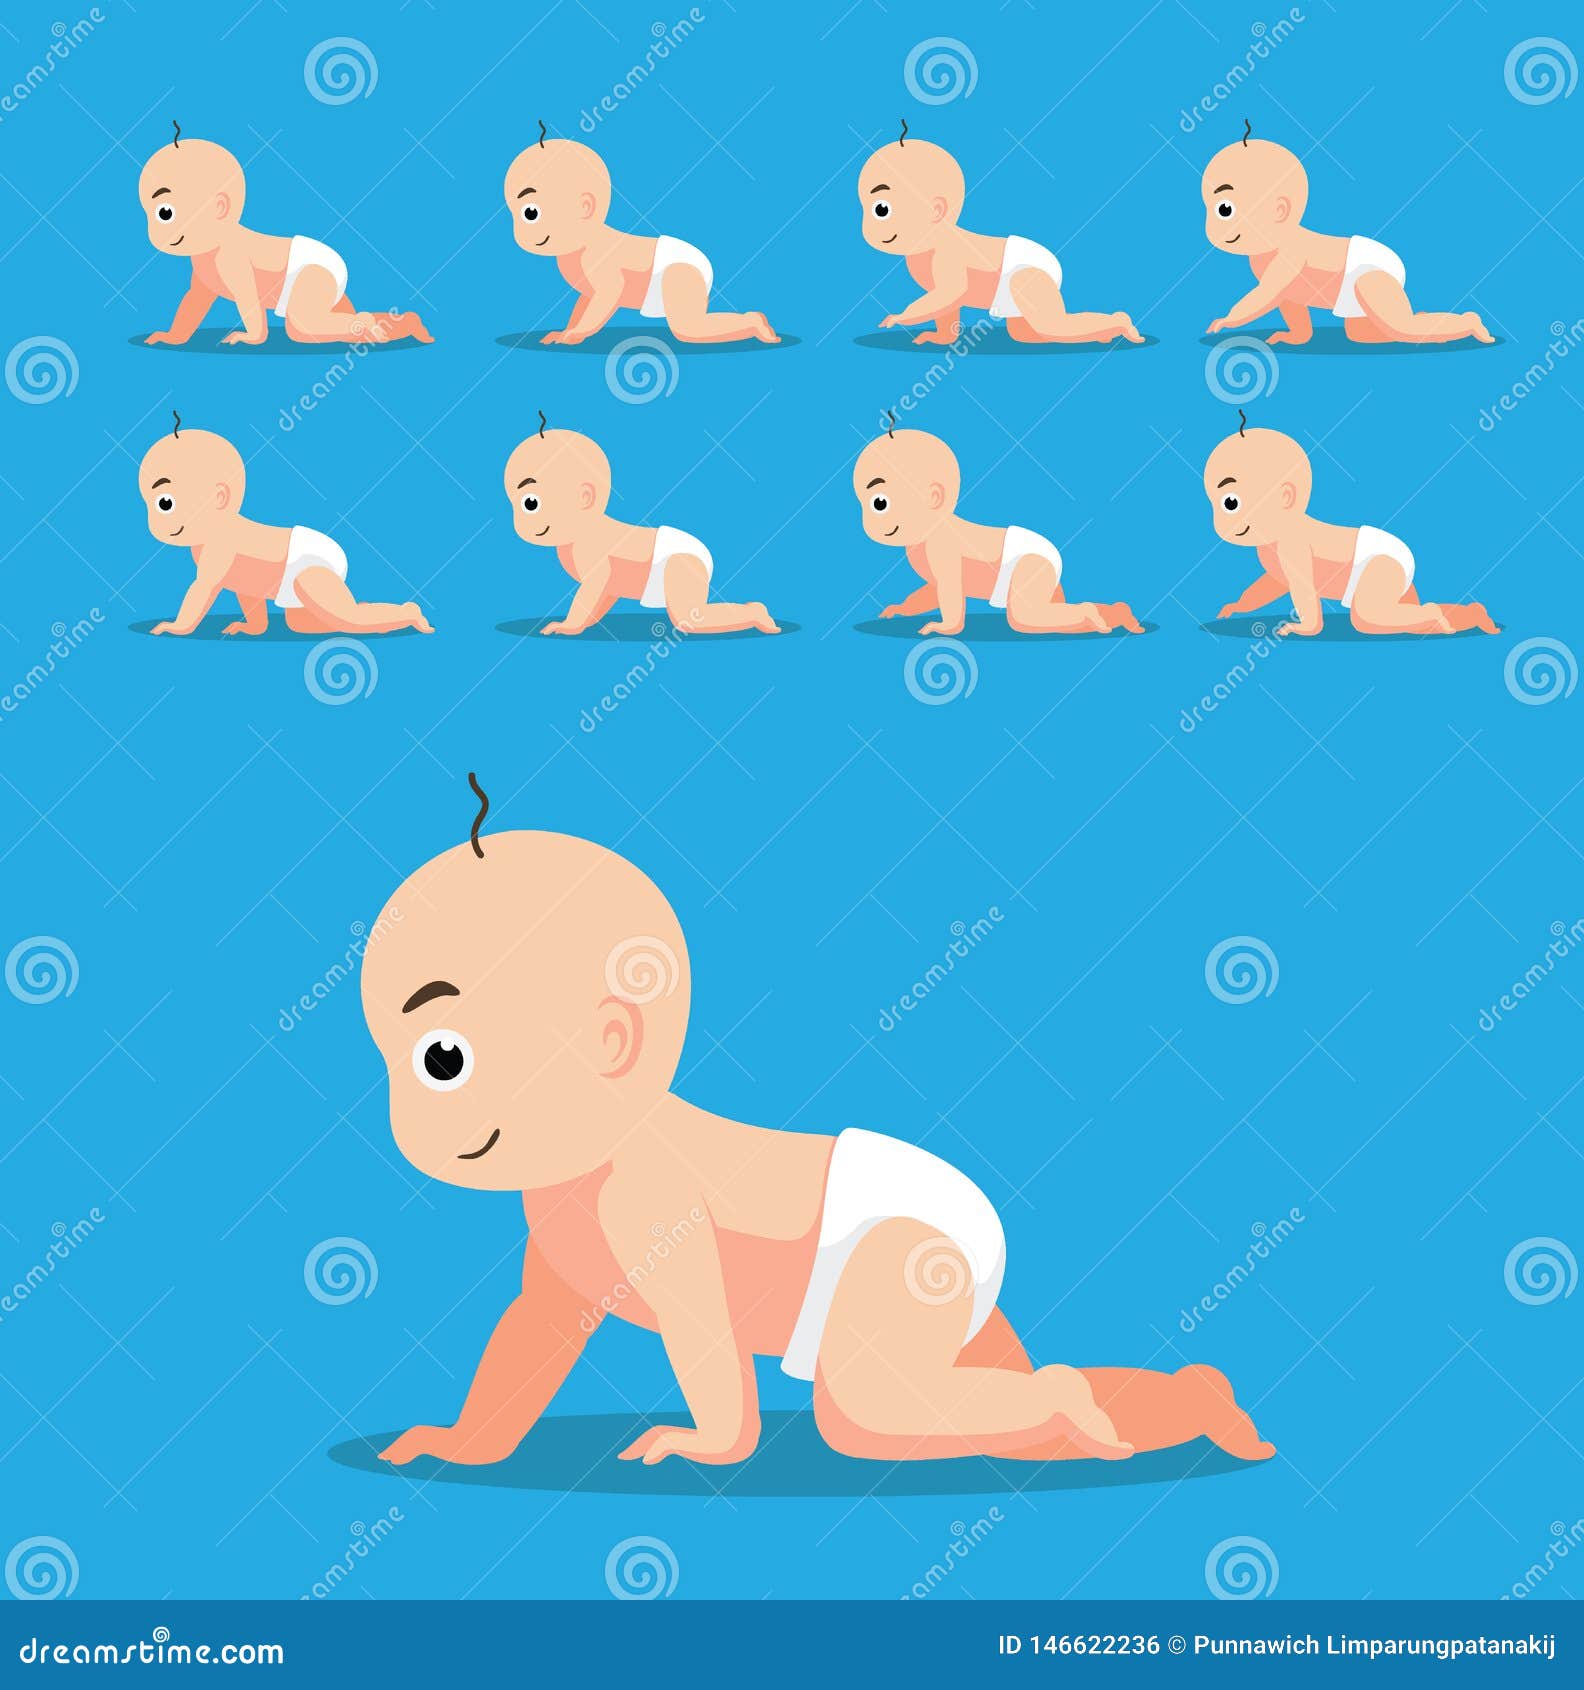 Cute Baby Crawling Cartoon Poses Vector Illustration Animation Sequence  Frame Character Stock Vector - Illustration of adorable, newborn: 146622236